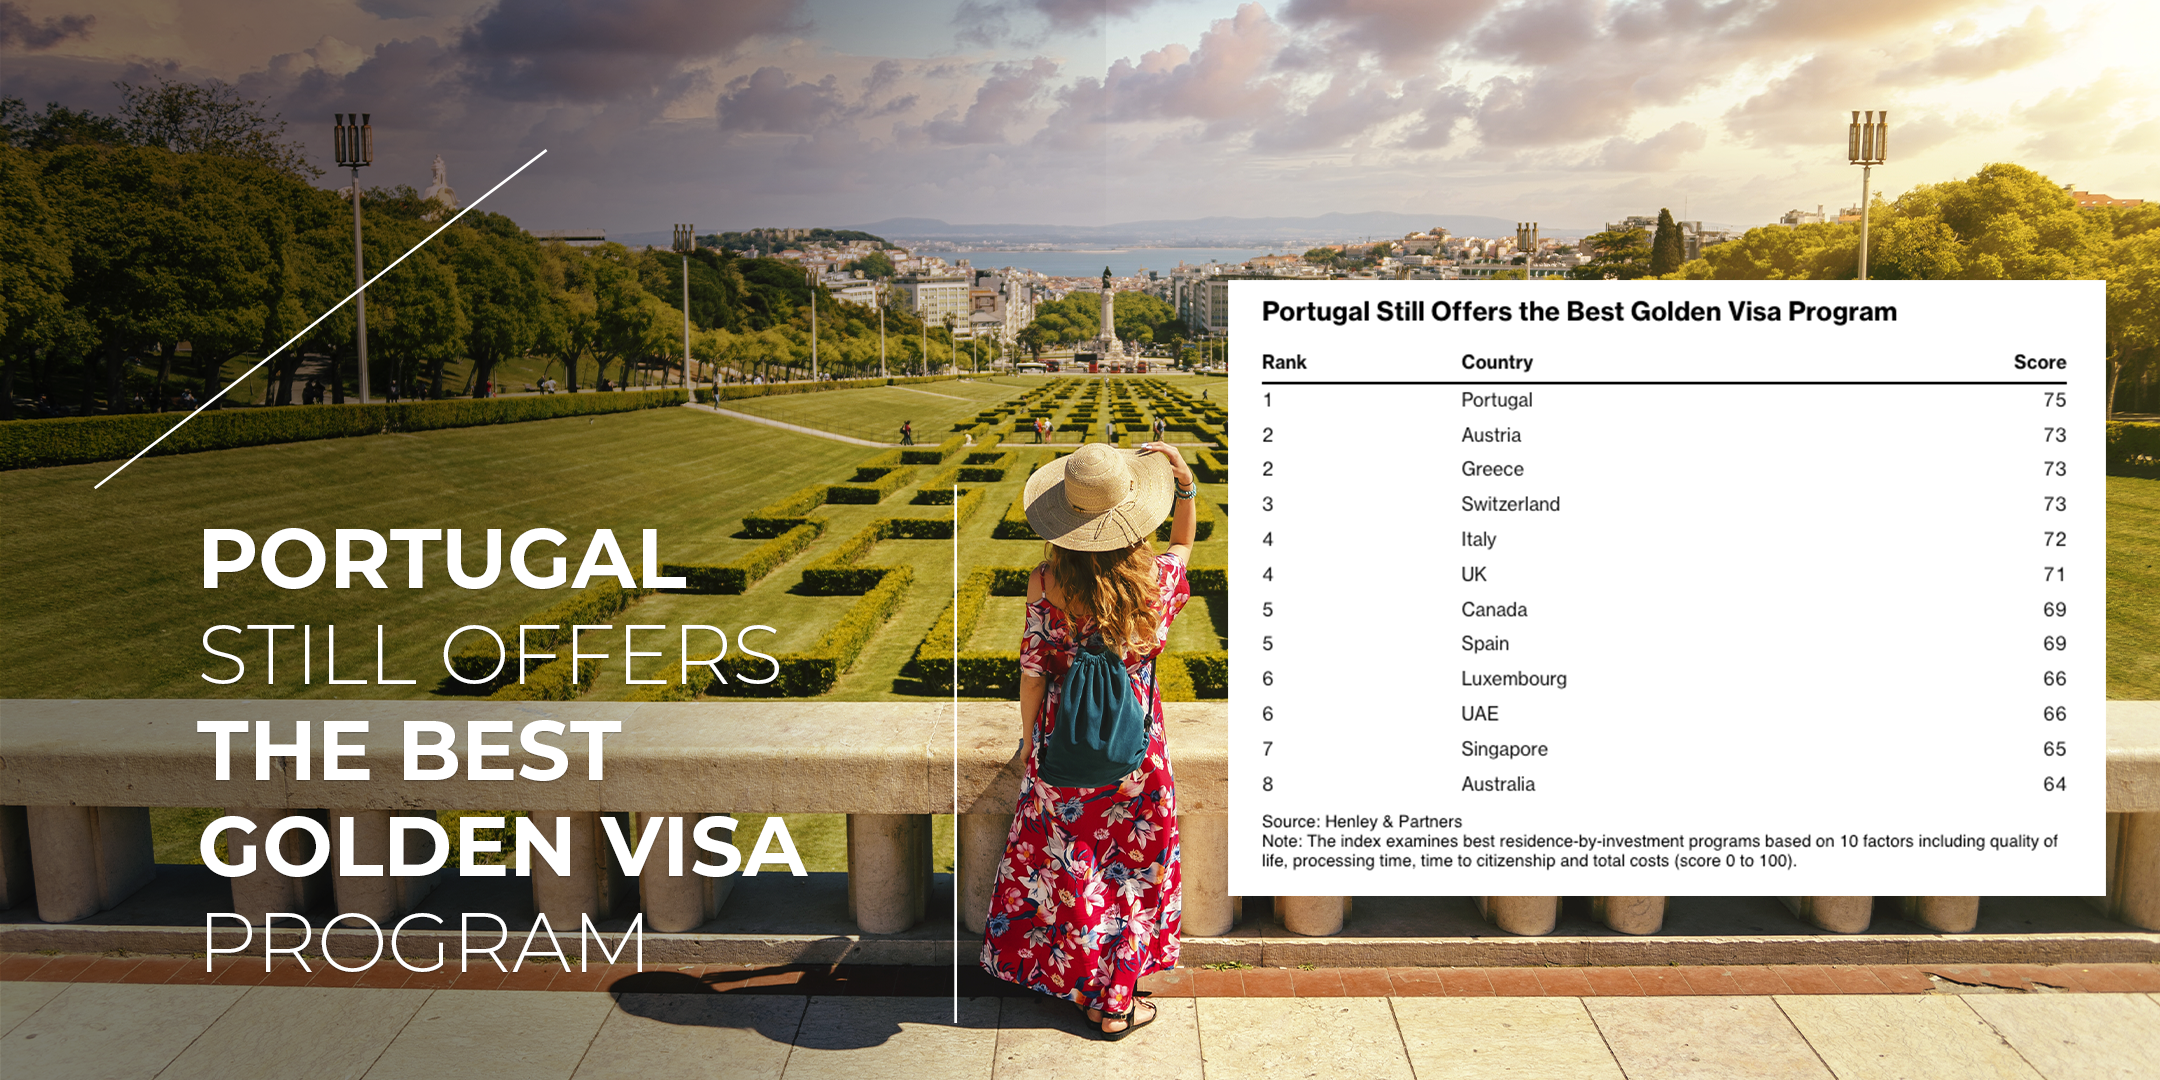 Portugal continues to offer the best golden visas in the world.